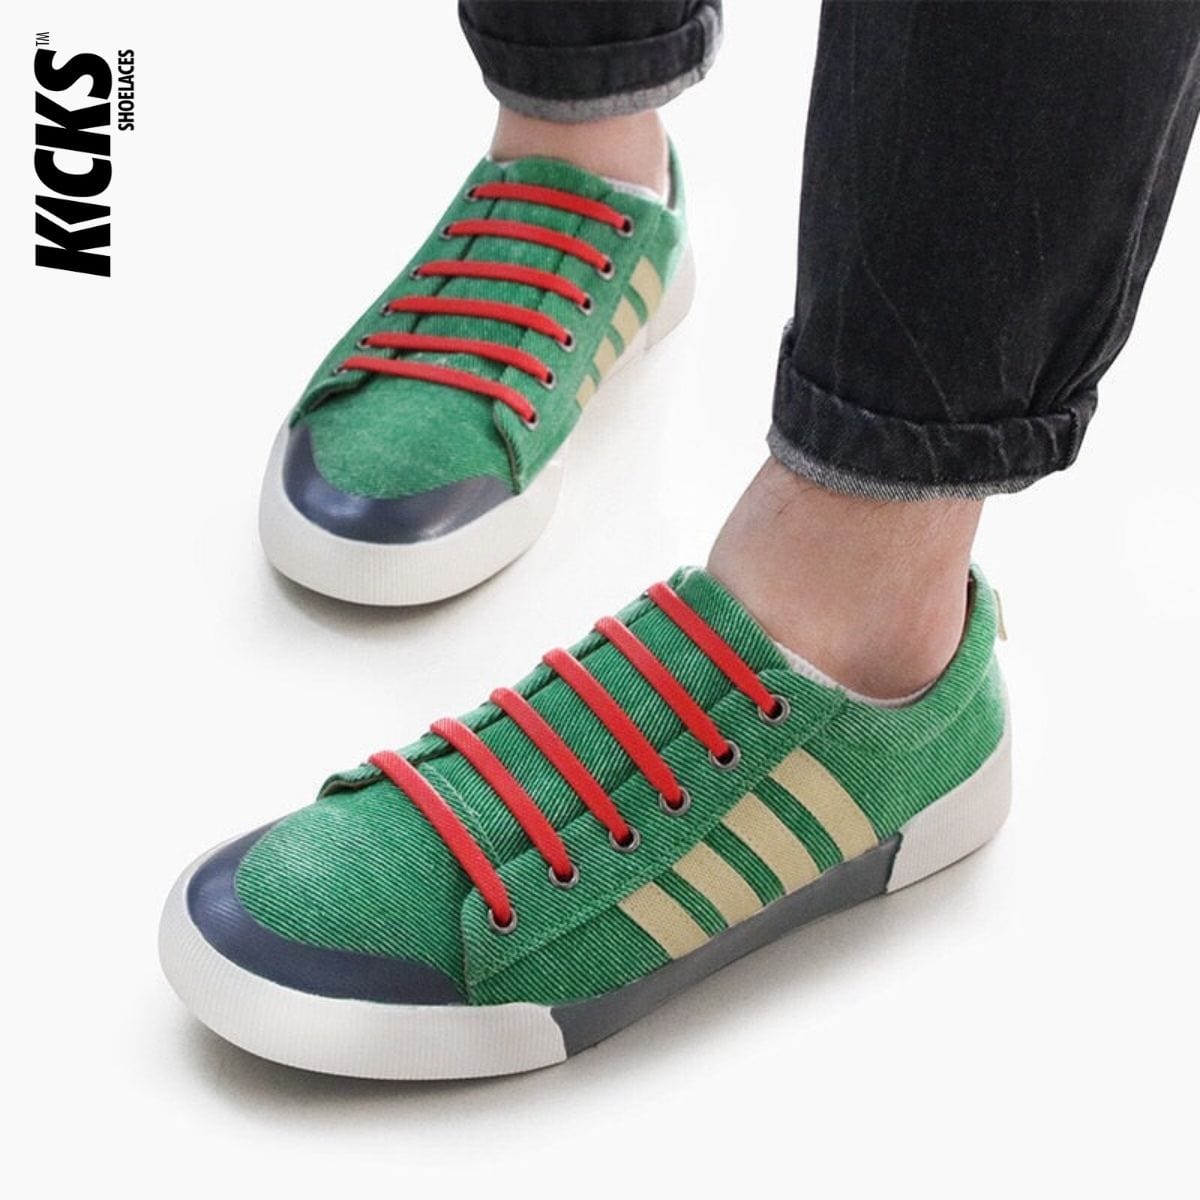 tieless-shoelace-replacements-on-sneakers-rainbow